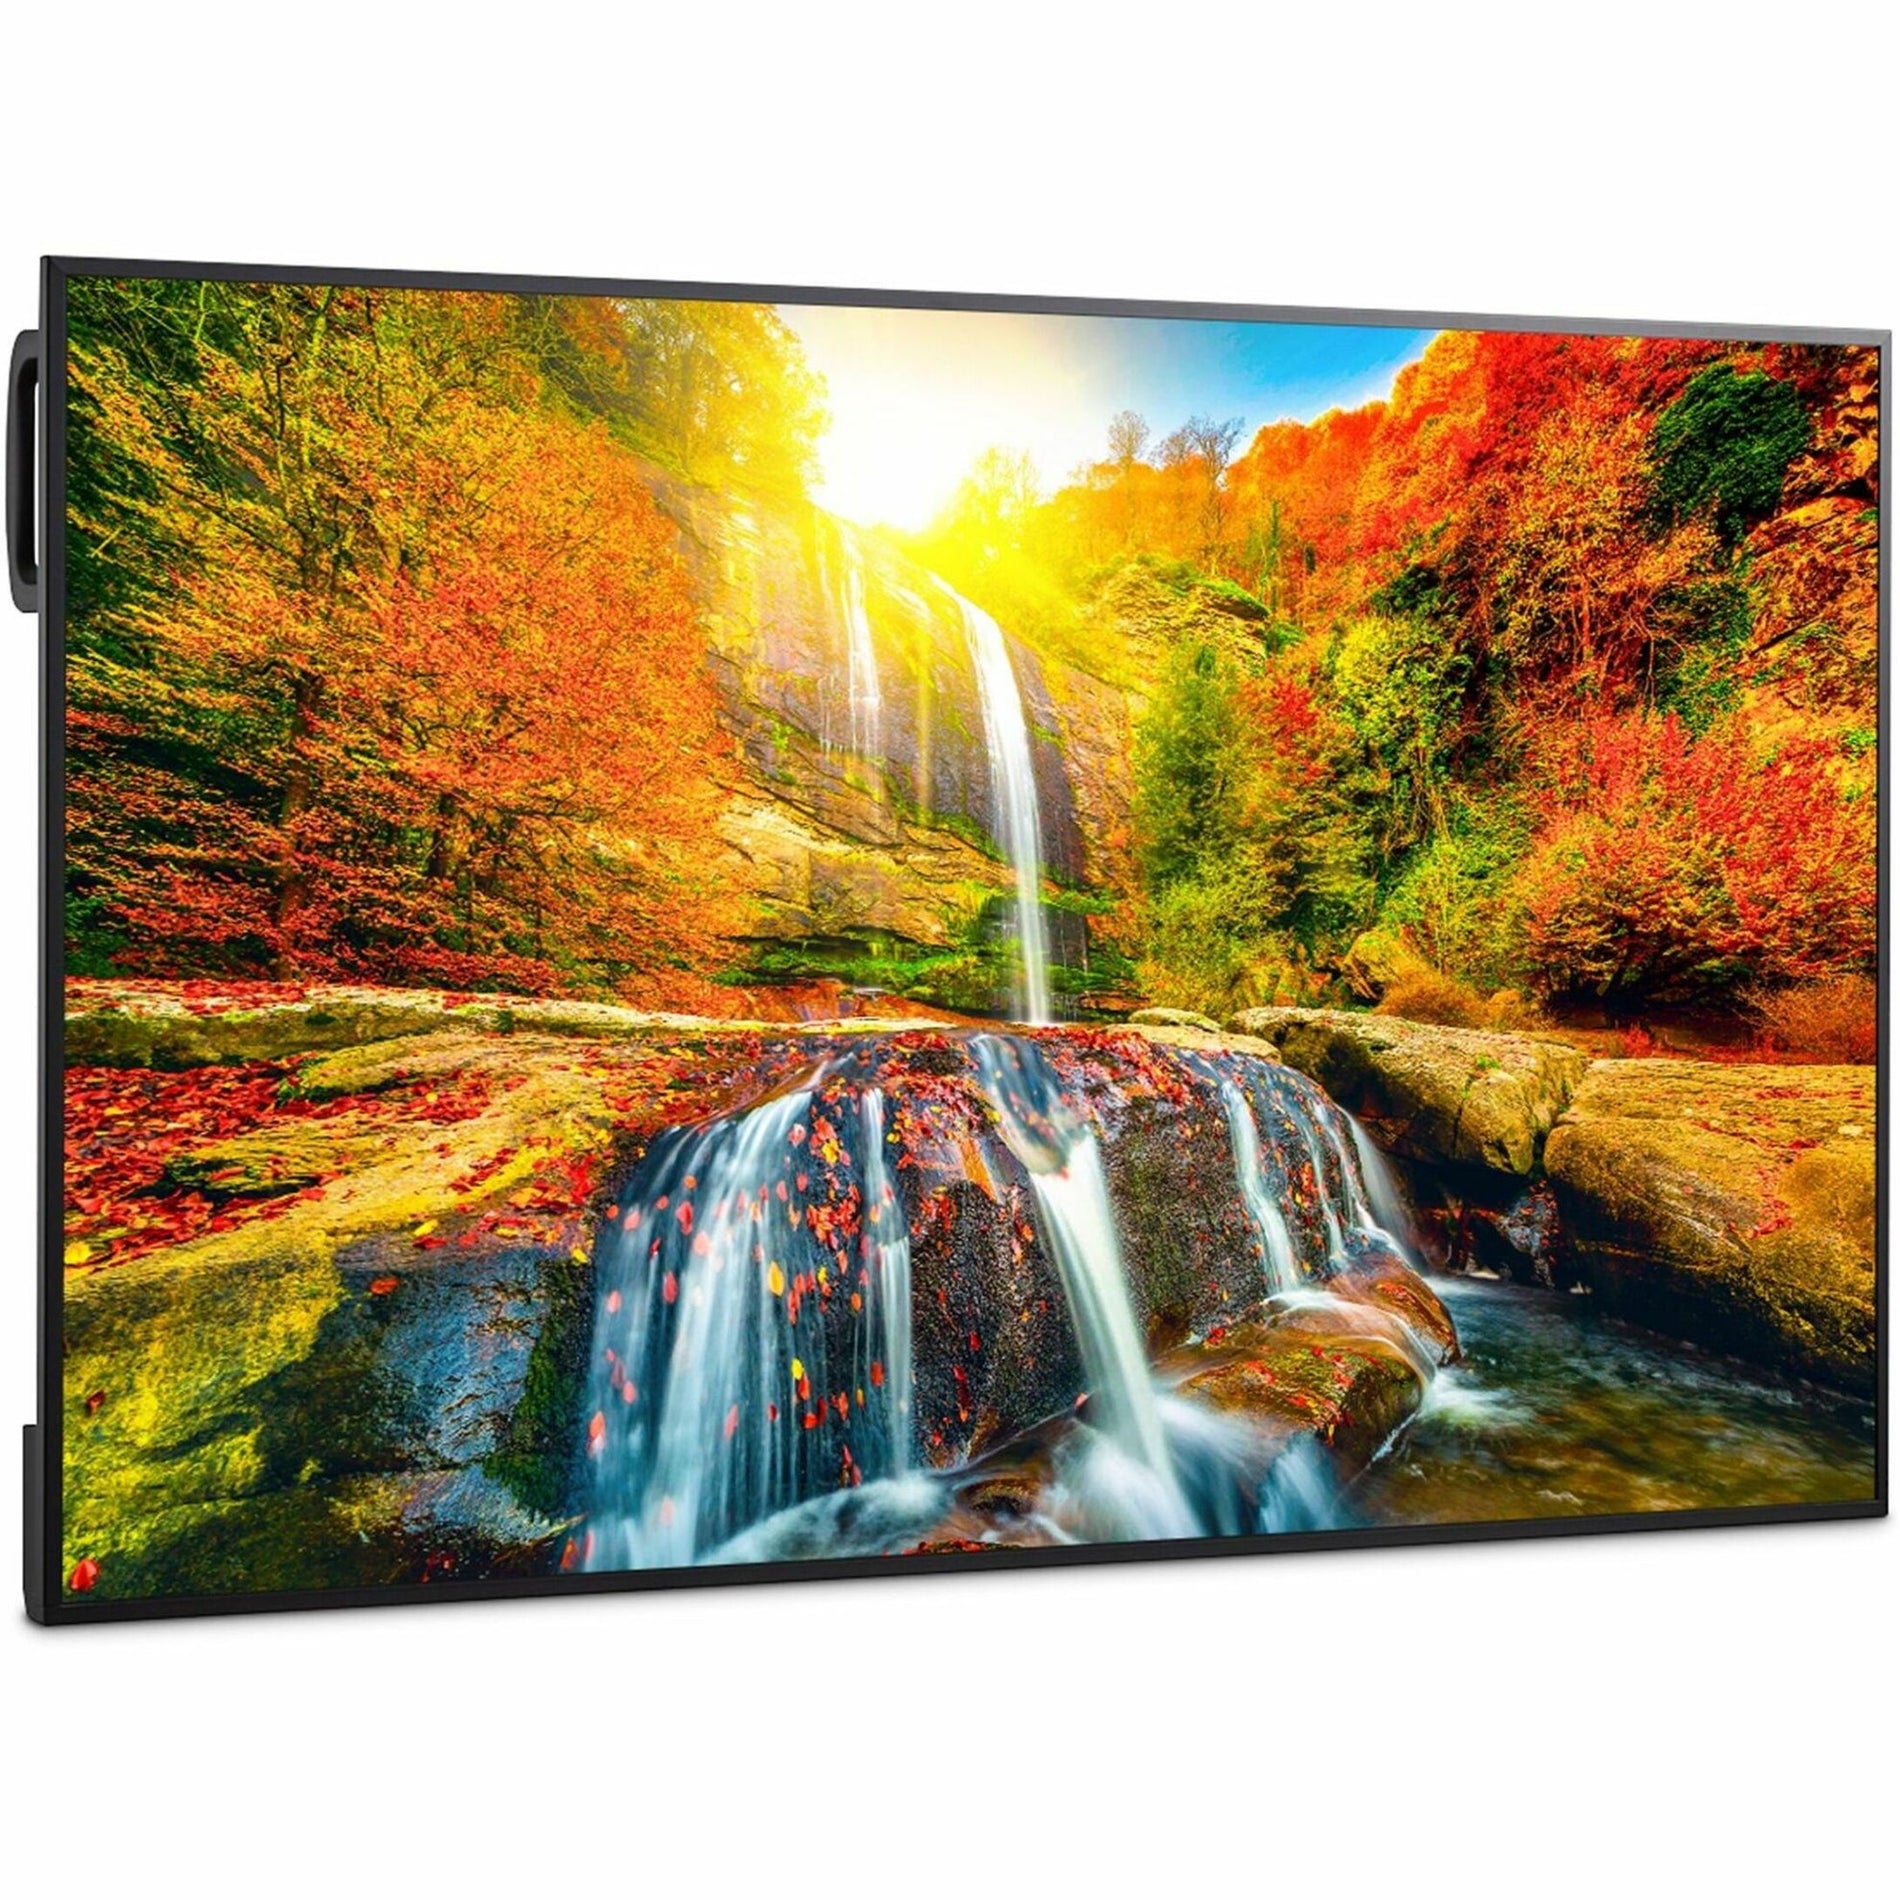 Sharp PN-ME432 43" Ultra High Definition Commercial Display, Advanced Super Dimension Switch Technology